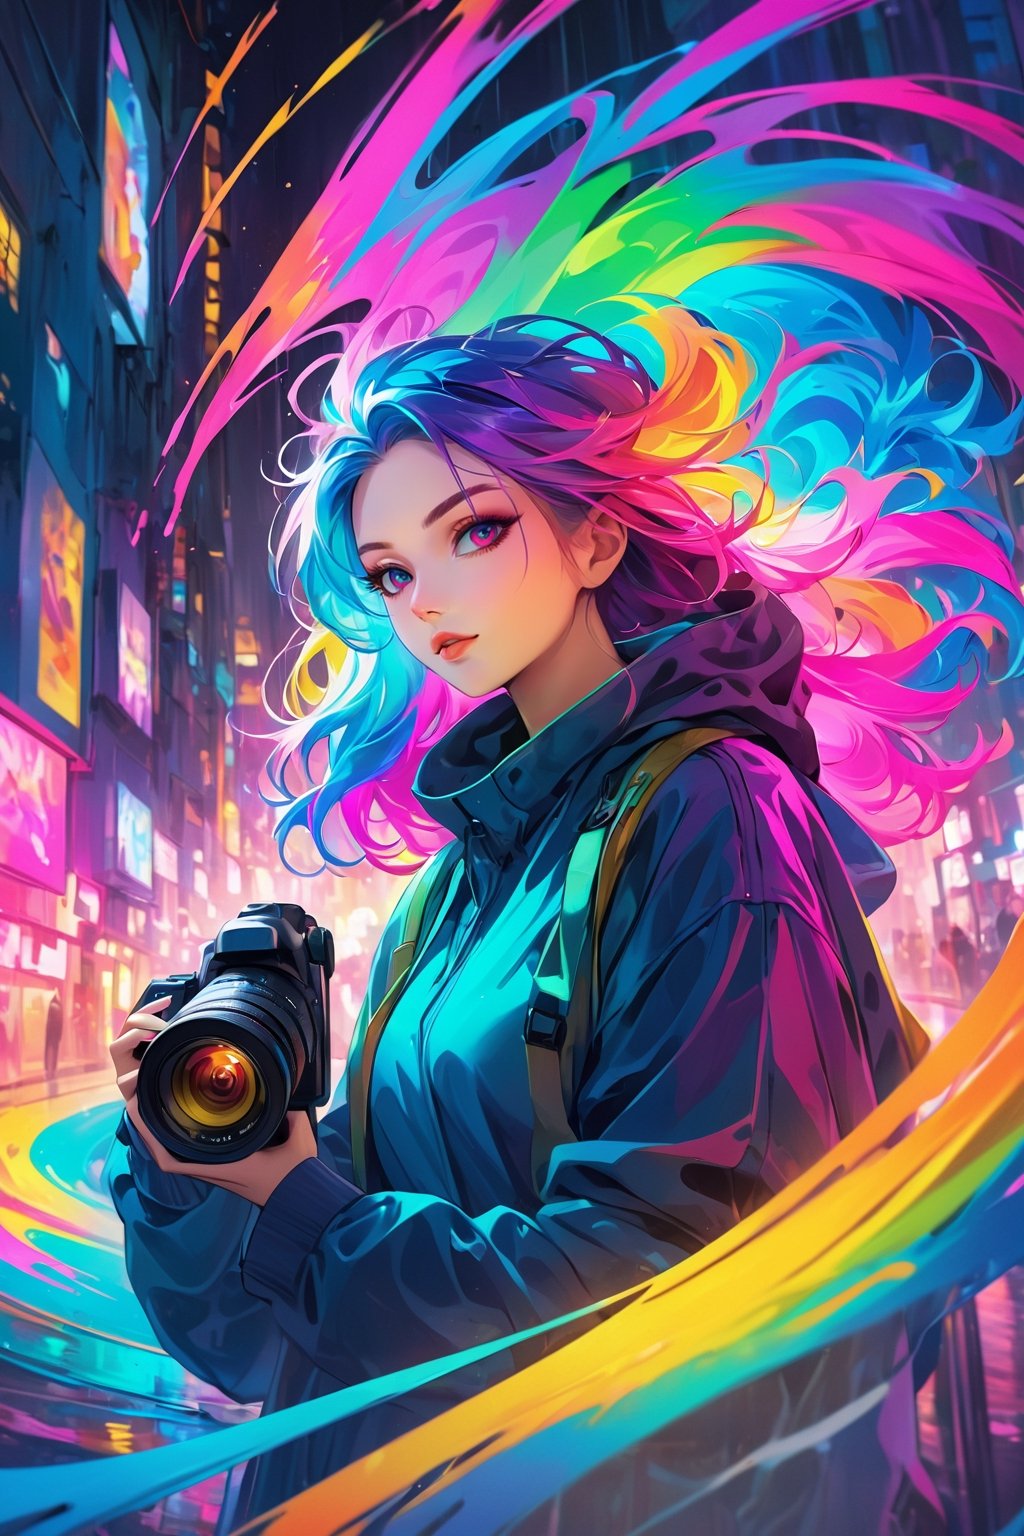 A mysteriously alluring photographer with vibrant, rainbow-colored hair holds a video camera, exuding a sense of depth and intrigue. The monochromatic color scheme only serves to emphasize the neon tones of the hair, adding a dynamic contrast to the scene. This digital painting expertly crafted with intricate digital brush strokes and vector graphics immerses viewers in a world where modern technology meets artistic expression. The portrait pops with neon hues, showcasing the photographer's creativity and passion in a visually captivating way.